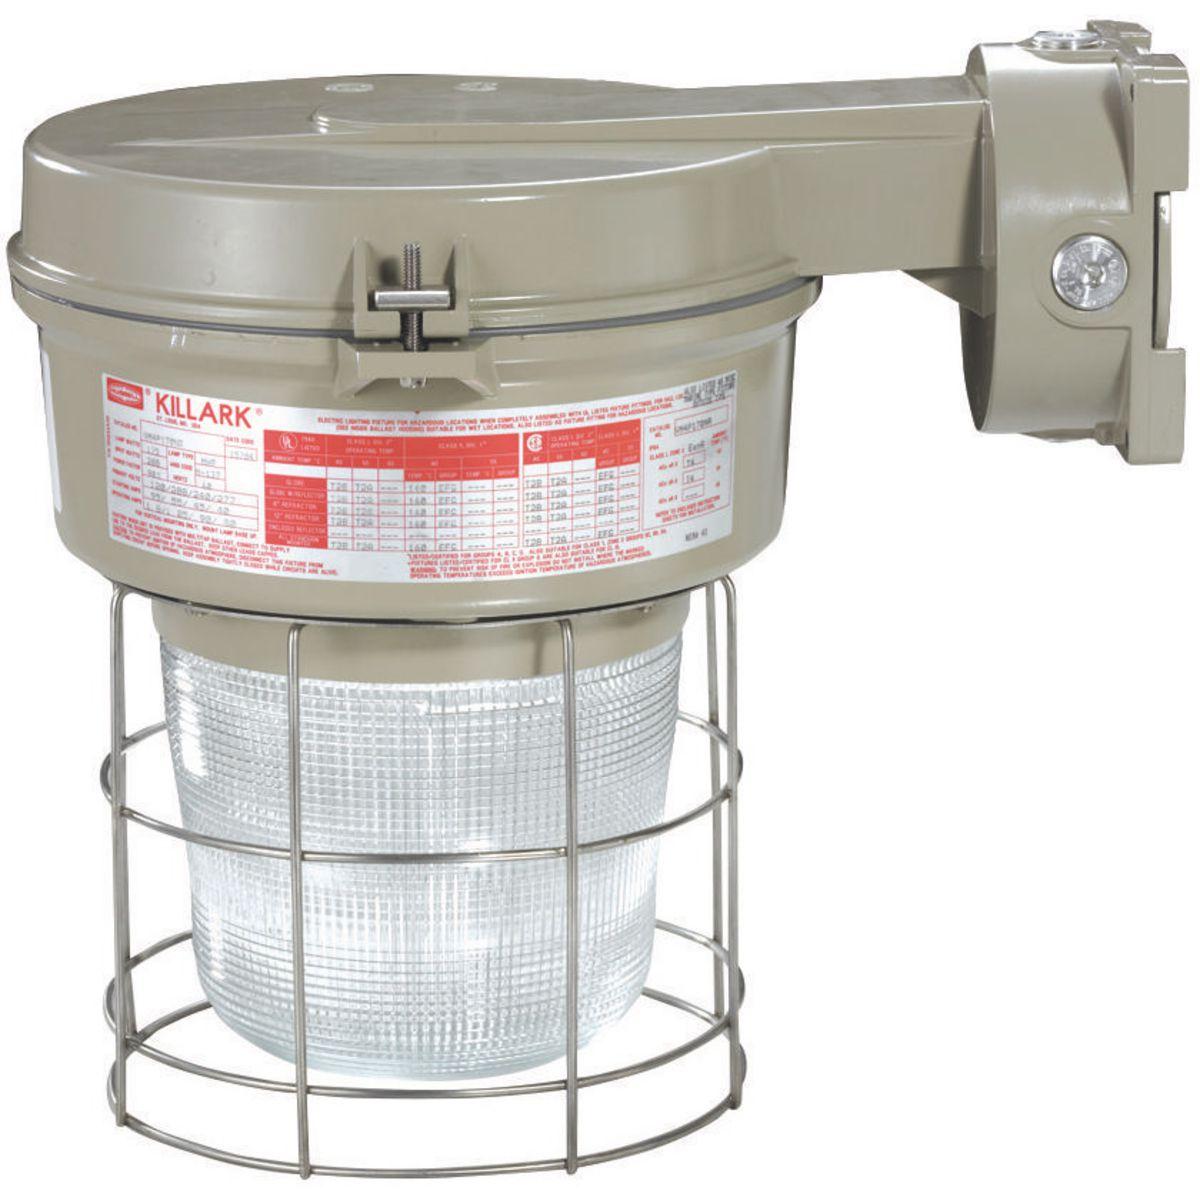 Hubbell VM4S155B2R5G VM4 Series - 150W High Pressure Sodium 480V - 3/4" Wall Mount - Type V Glass Refractor and Guard  ; Ballast tank and splice box – corrosion resistant copper-free aluminum alloy with baked powder epoxy/polyester finish, electrostatically applied for comple